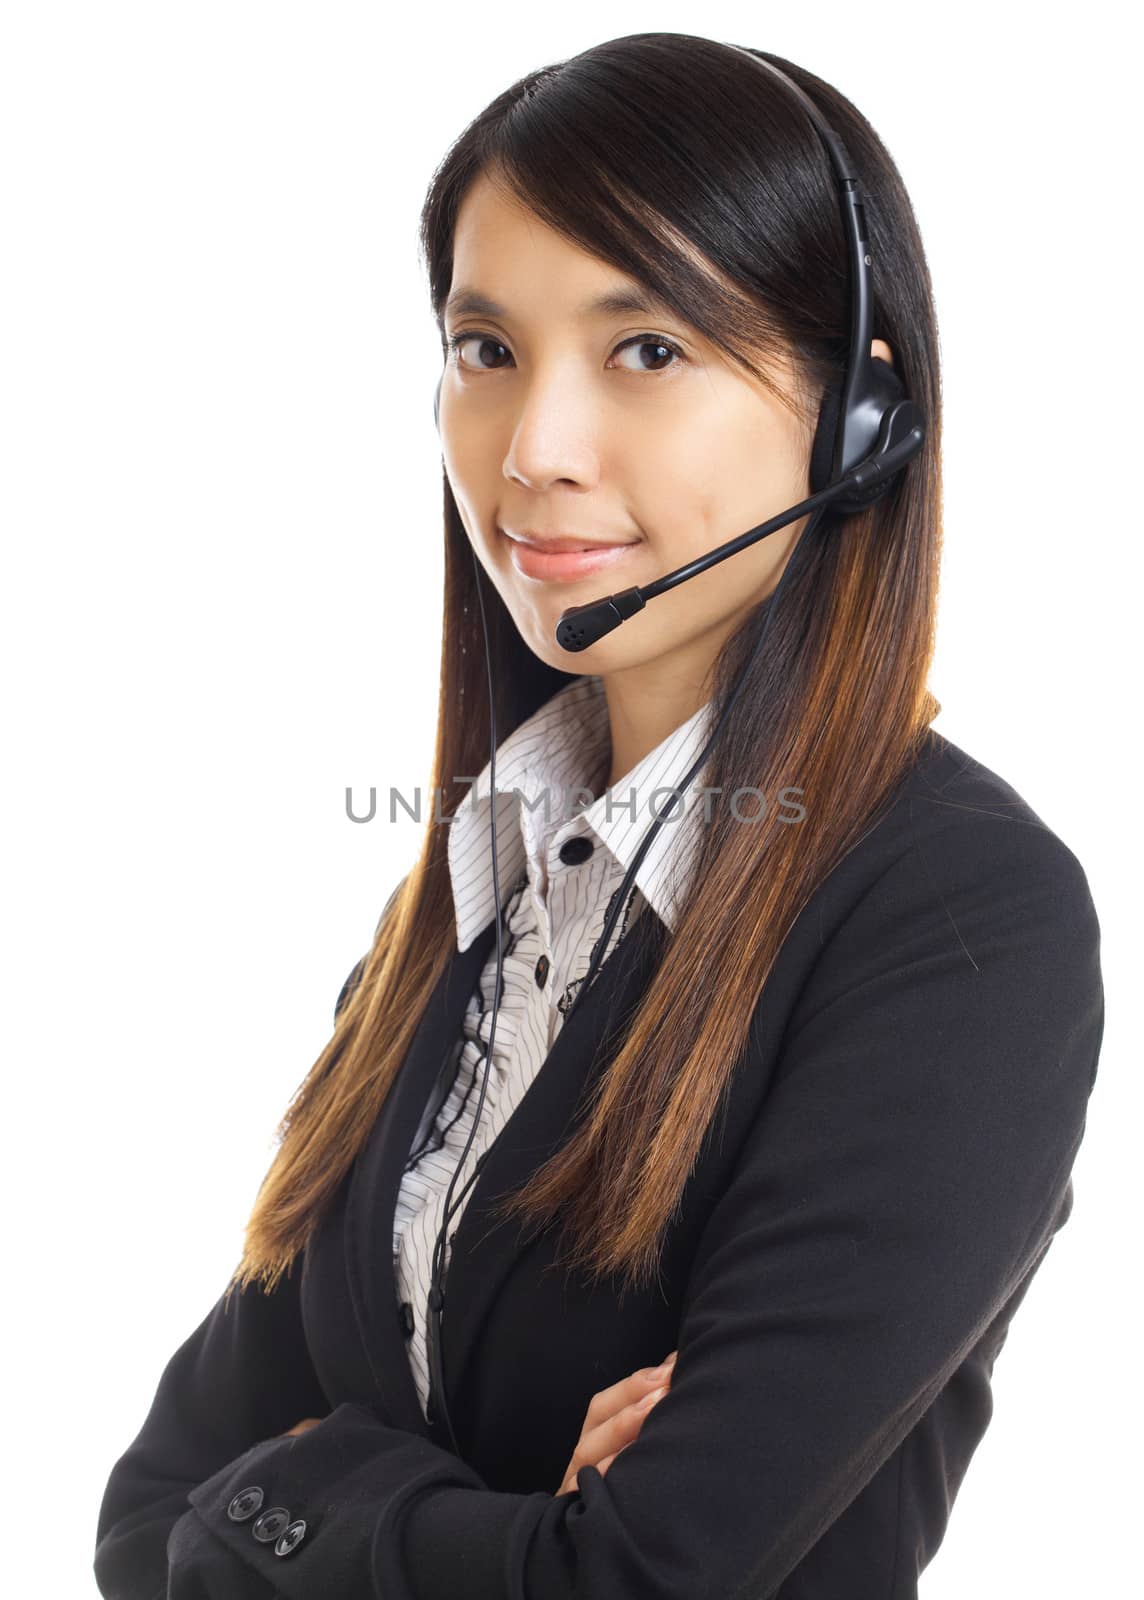 Asian business woman with headset